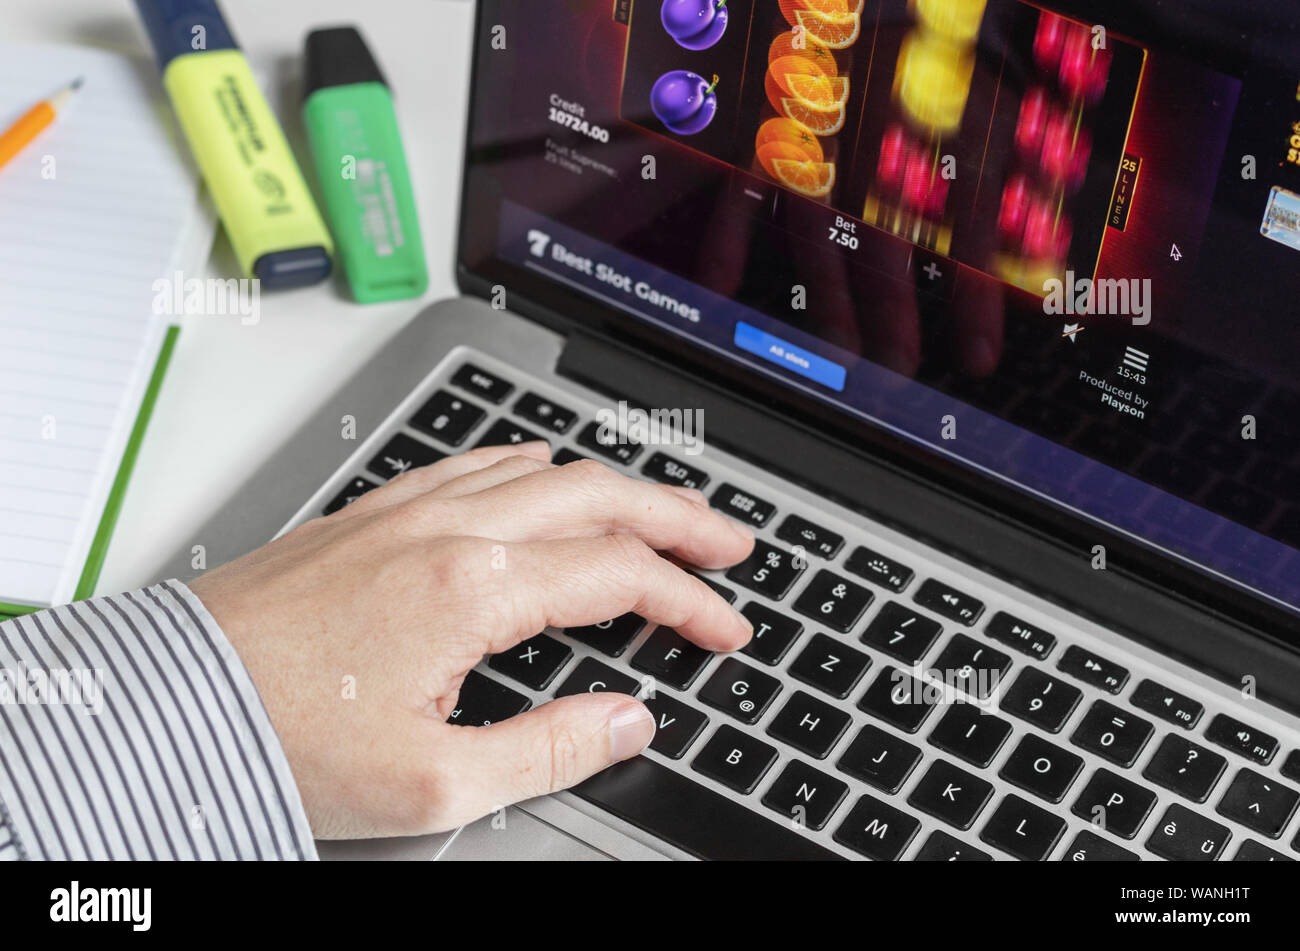 London / UK - August 14th 2019 - Online gambling at the workplace, person at a computer keyboard playing fruit machine slots Stock Photo